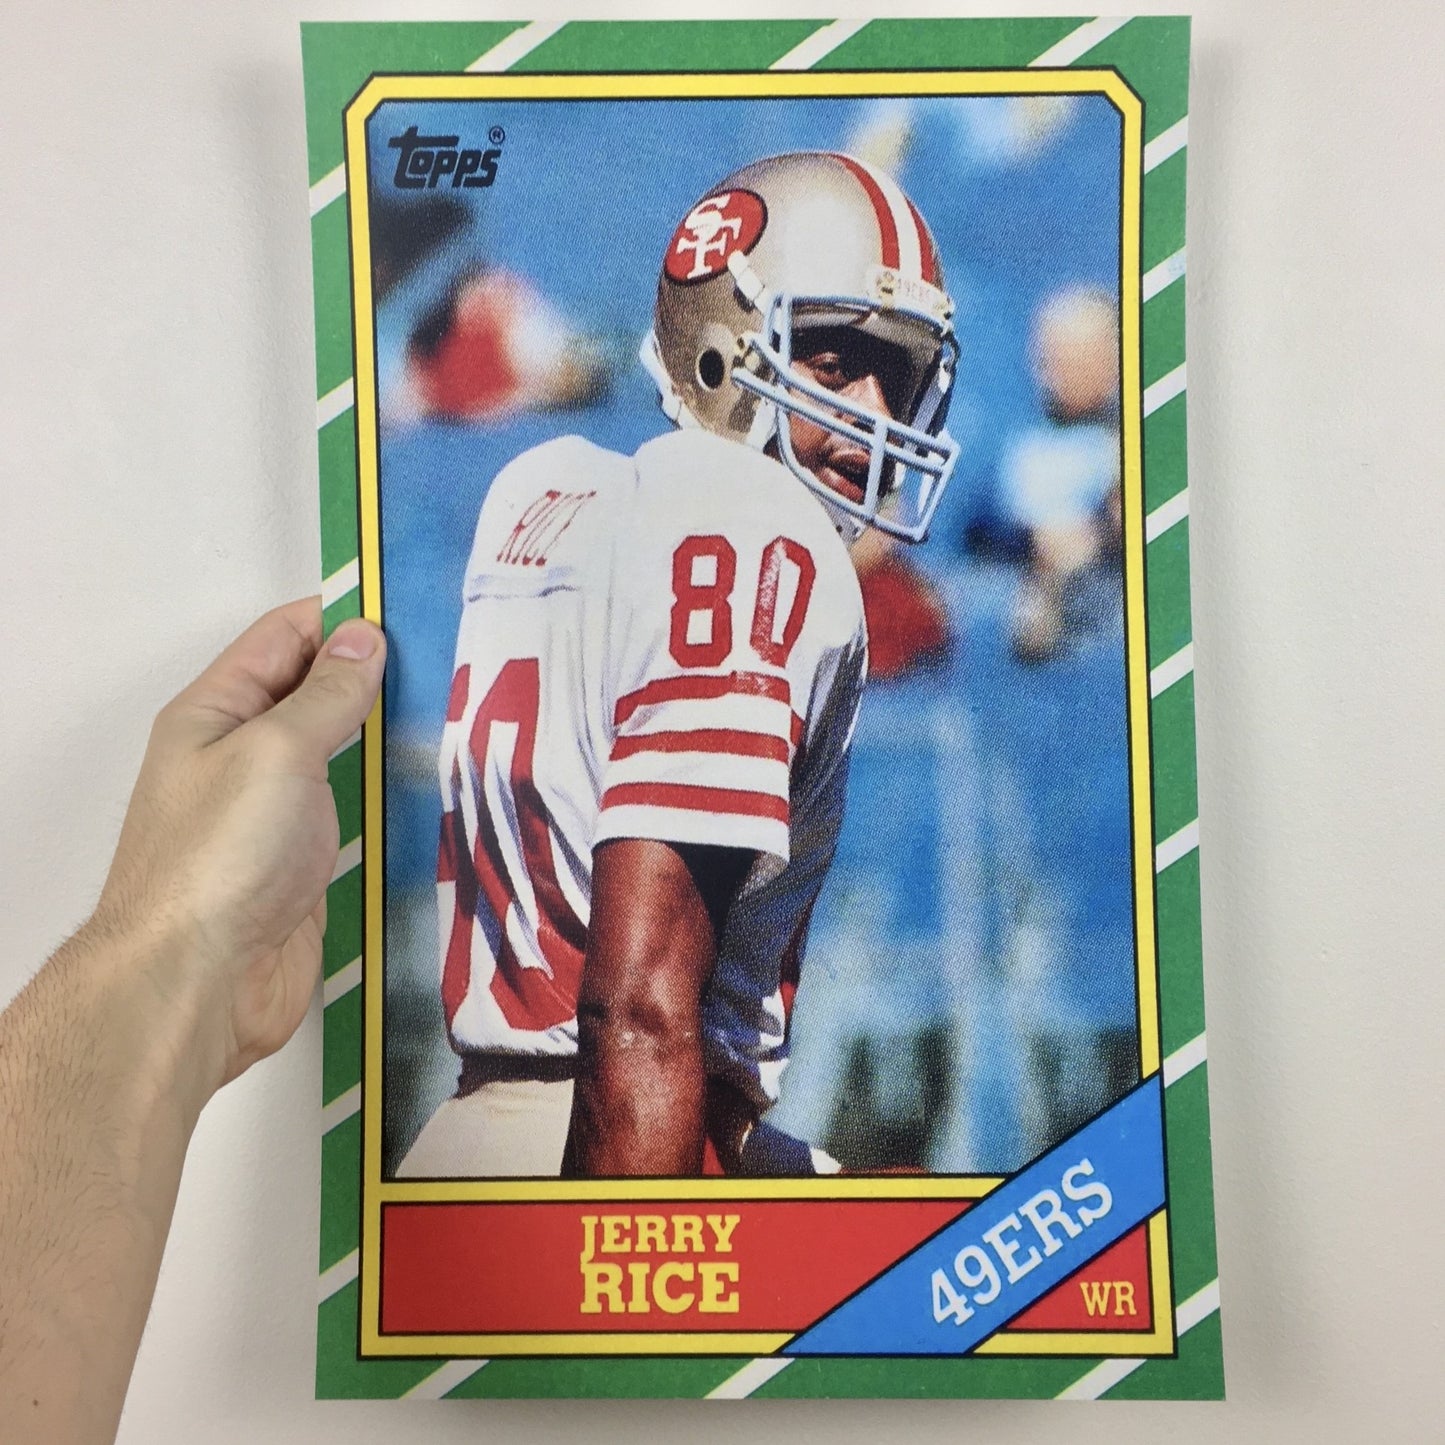 Jerry Rice Poster